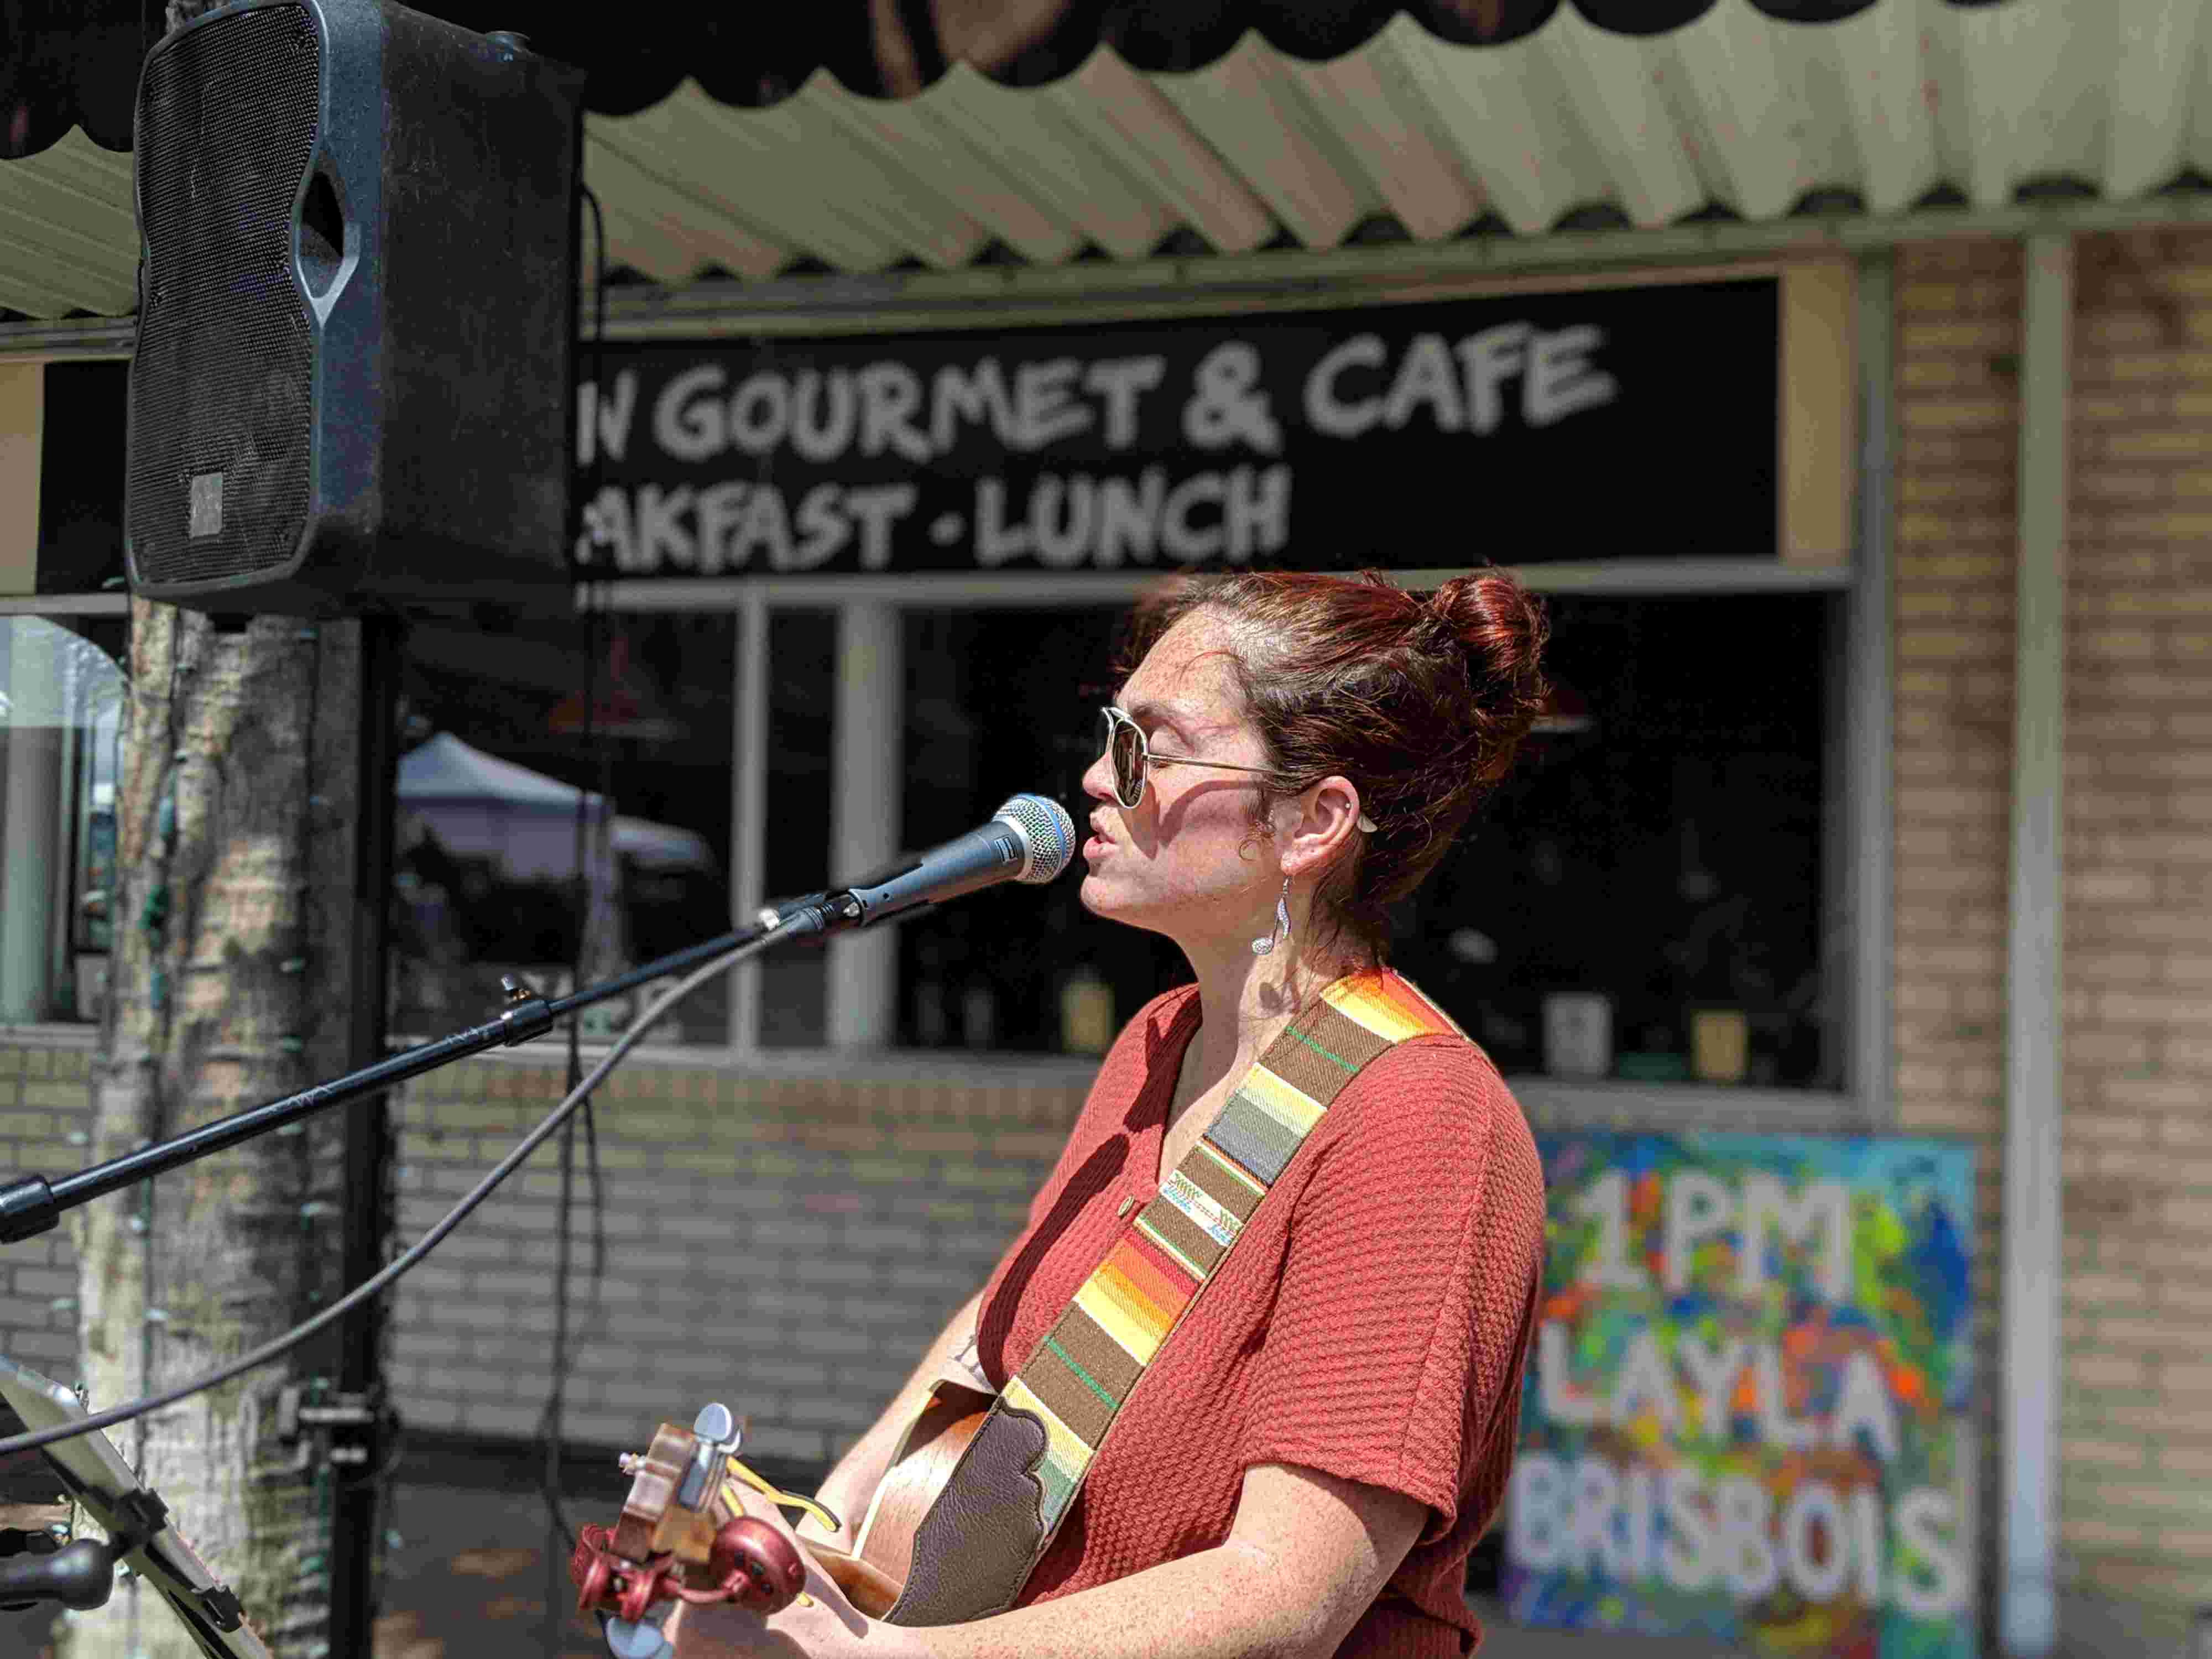 Live performances are scheduled at the 43rd Annual Leesburg Art Fest, throughout the free weekend event.